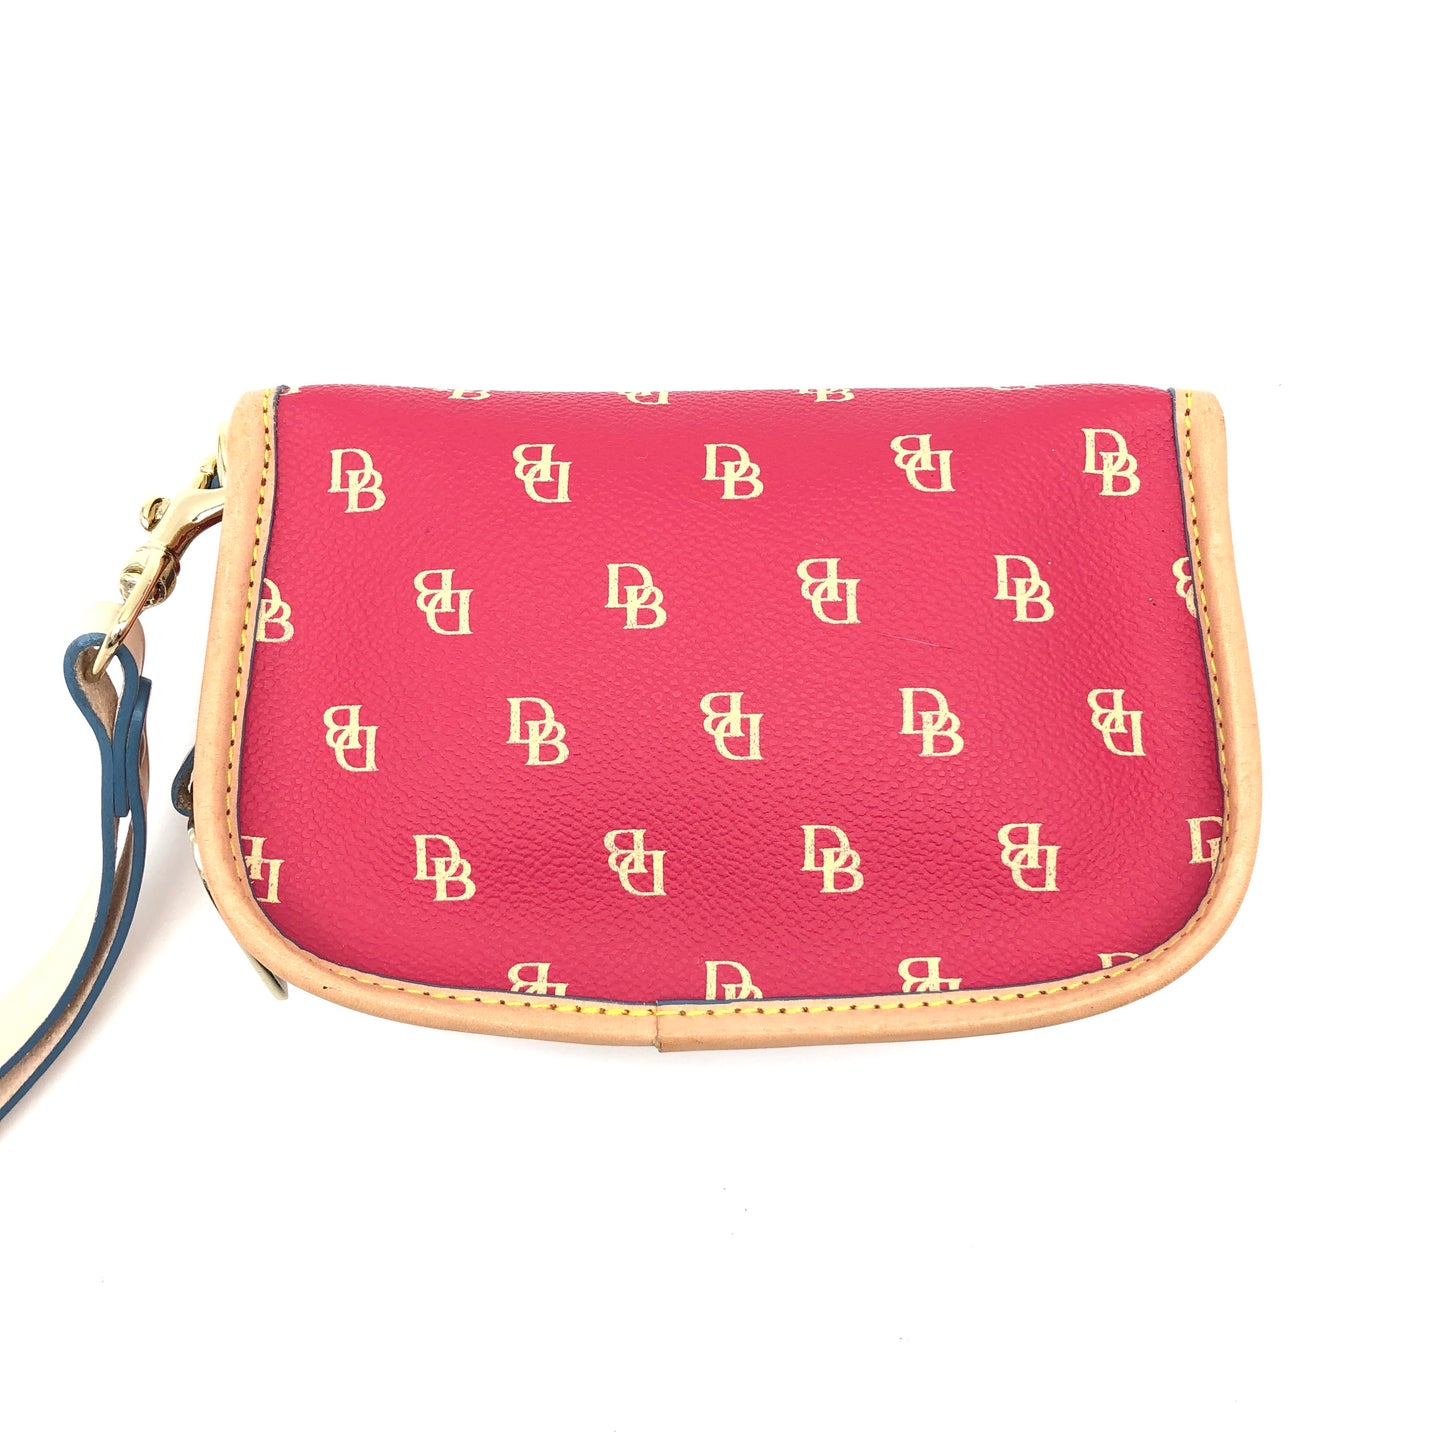 Wristlet By Dooney And Bourke  Size: Small